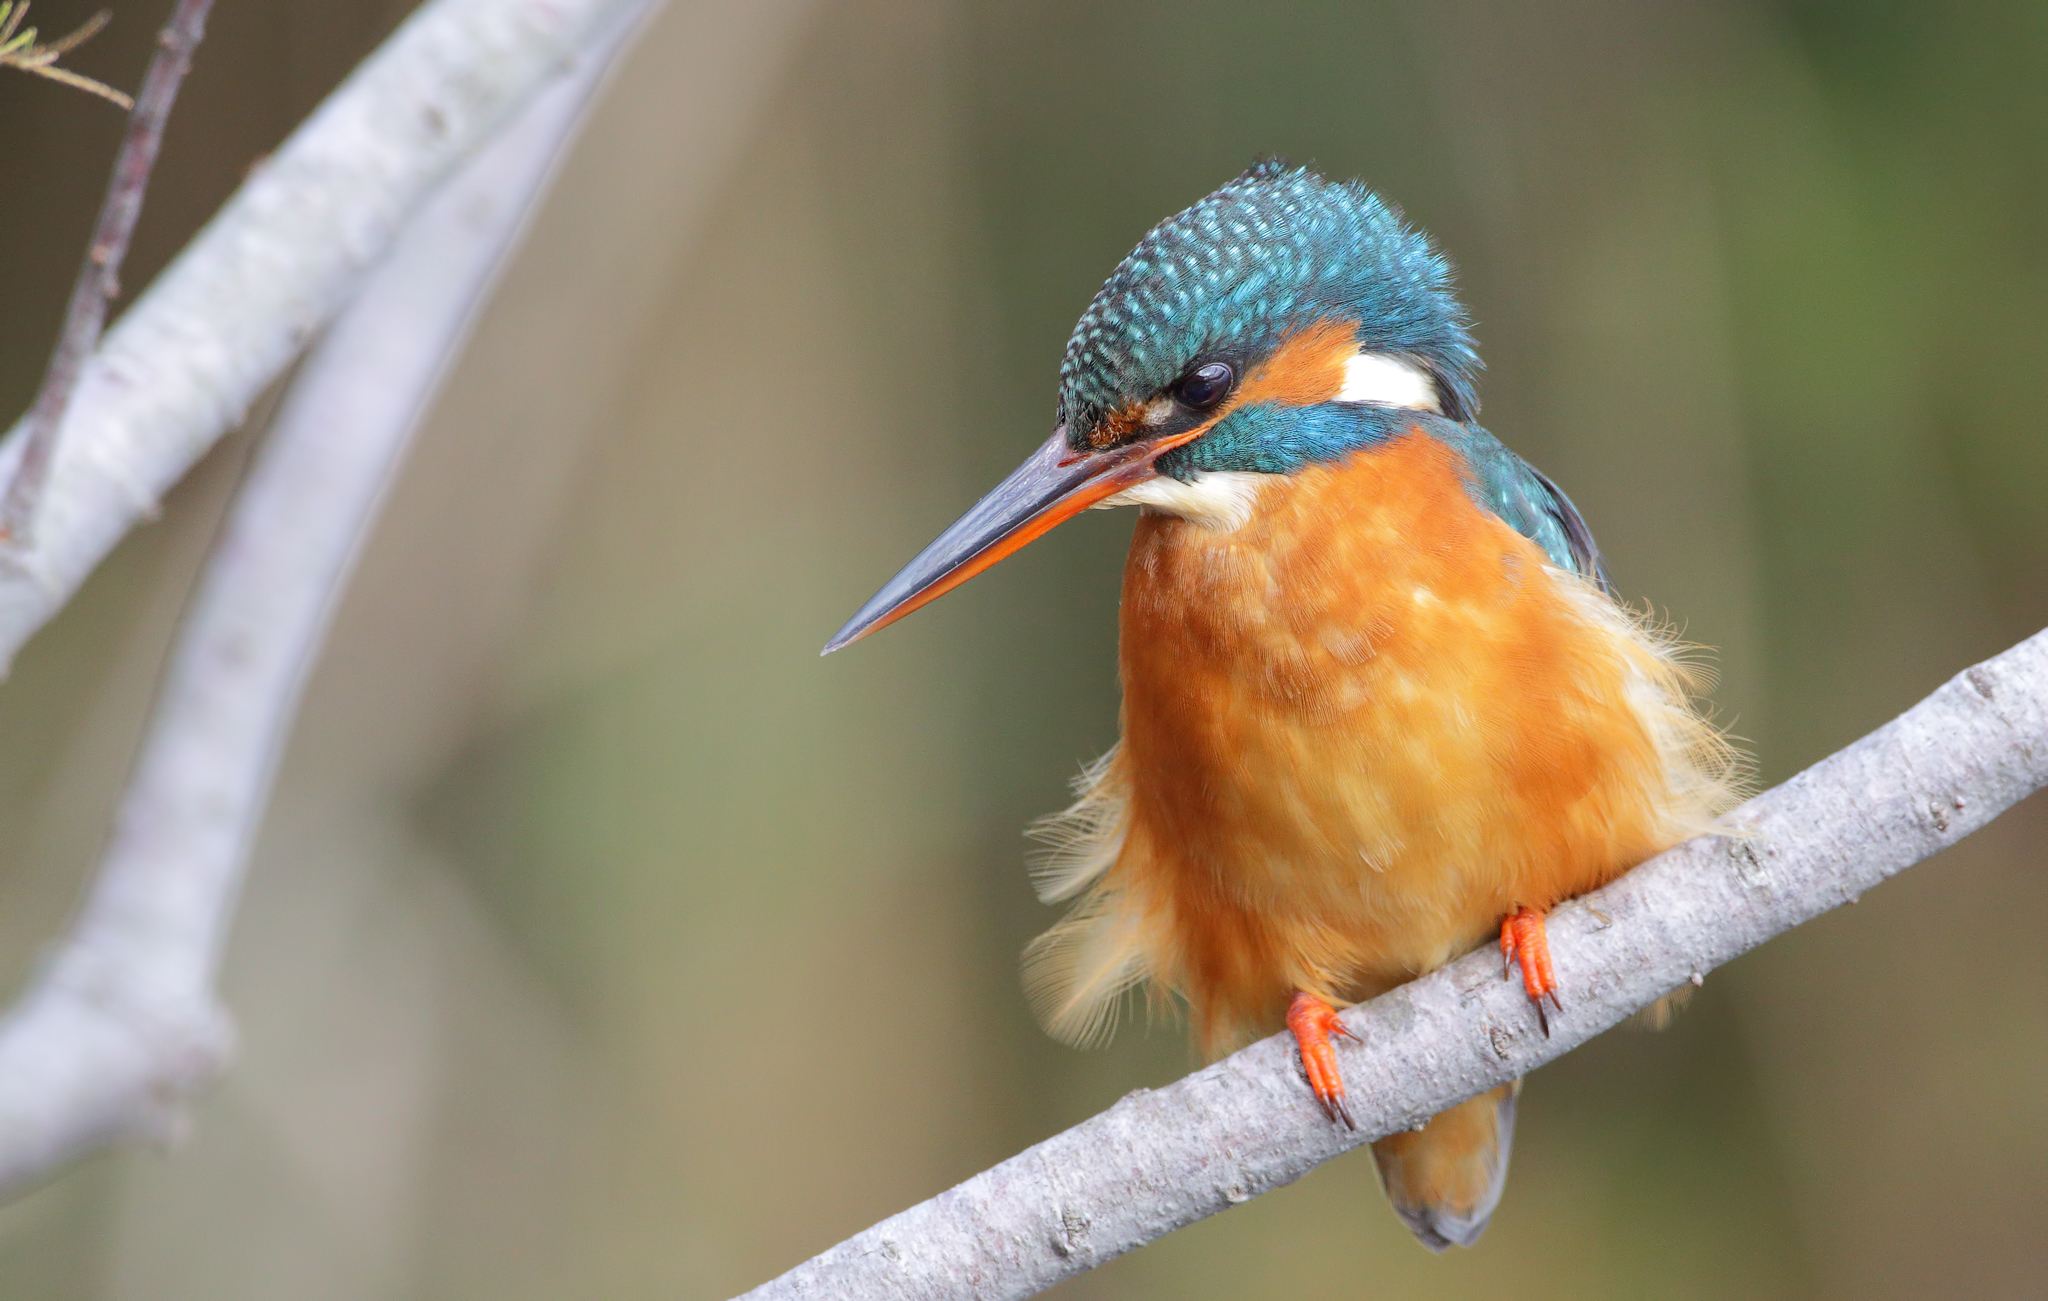 Gone with the wind (female kingfisher)...